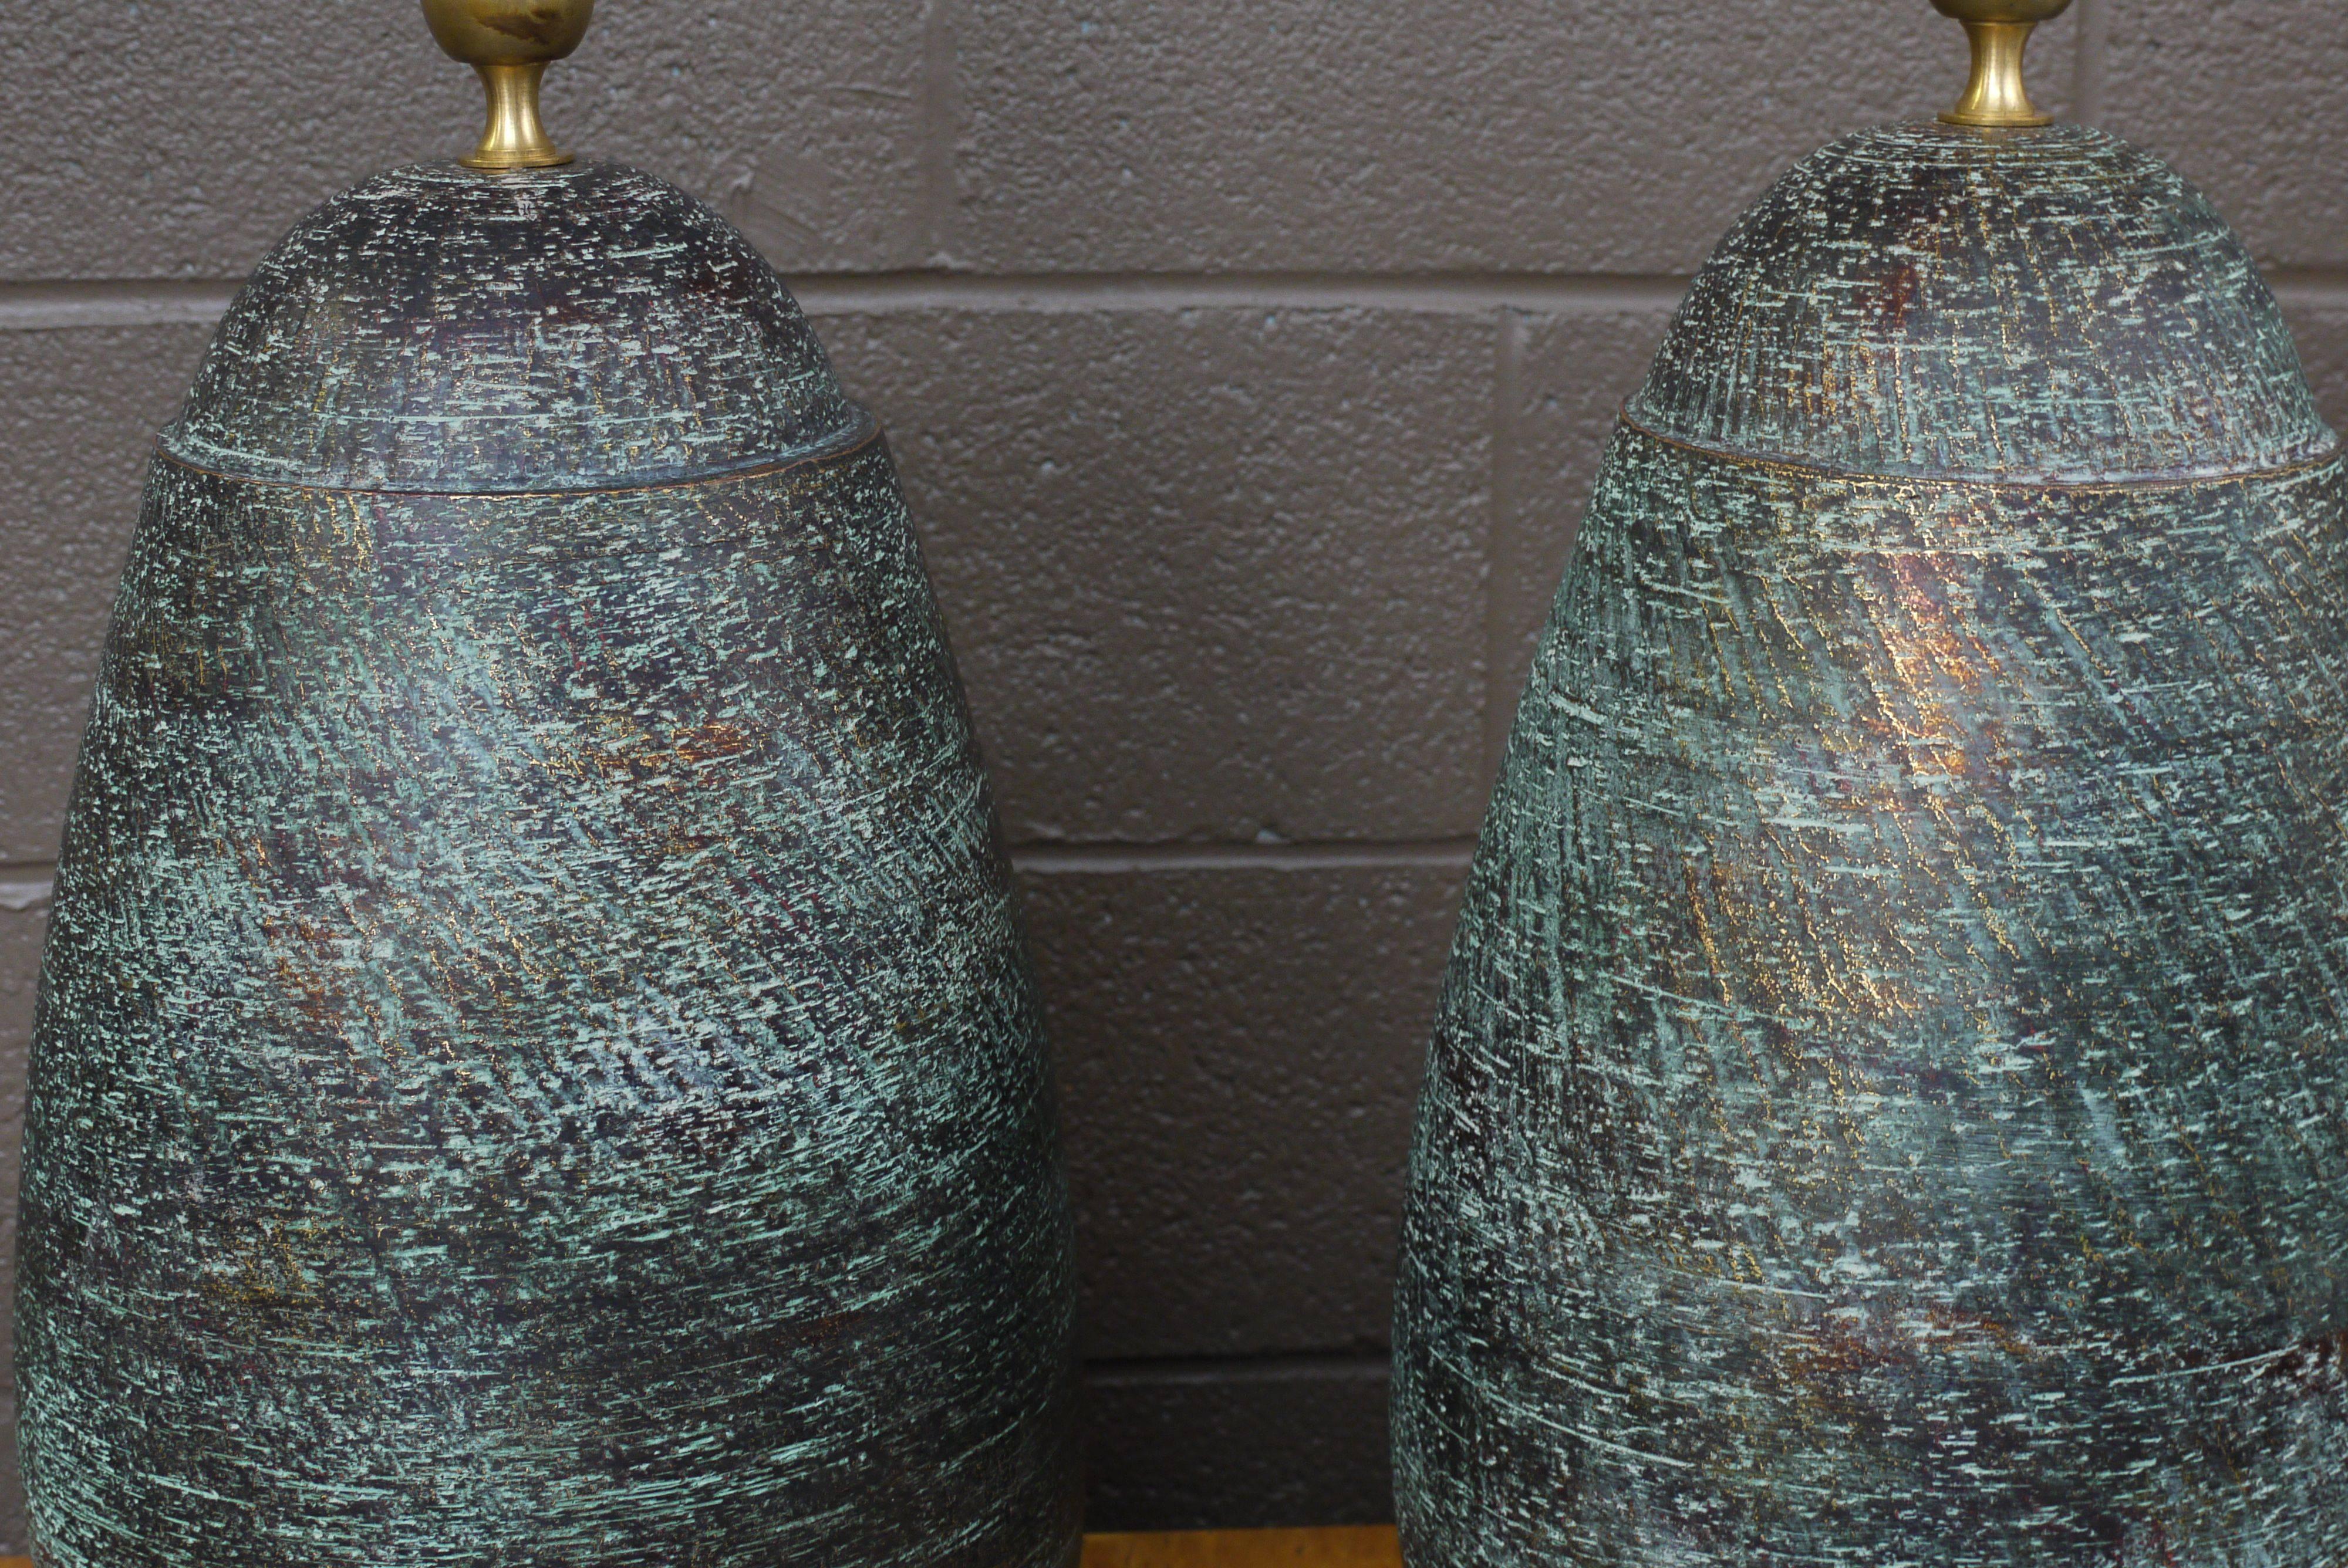 Stunning pair of Italian lamps attributed to Bitossi. Great vintage rubbed over the textured surface with hints of gold. Ceramic section measures 20